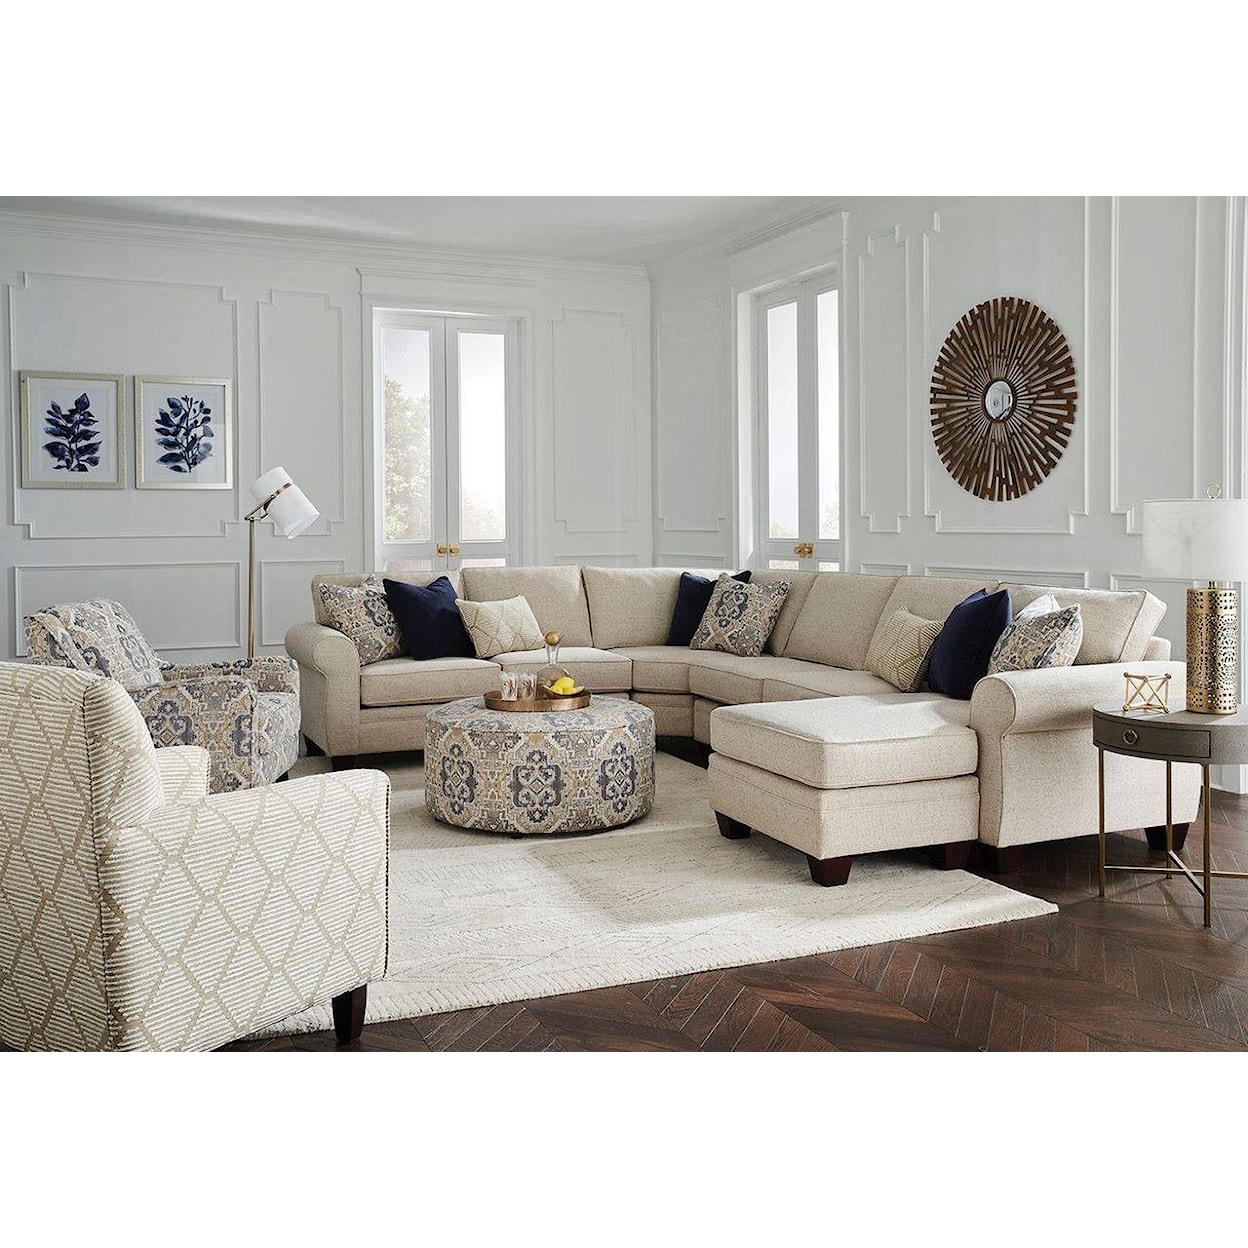 VFM Signature 1170 PLUMLEY BISQUE Sectional with Right Chaise